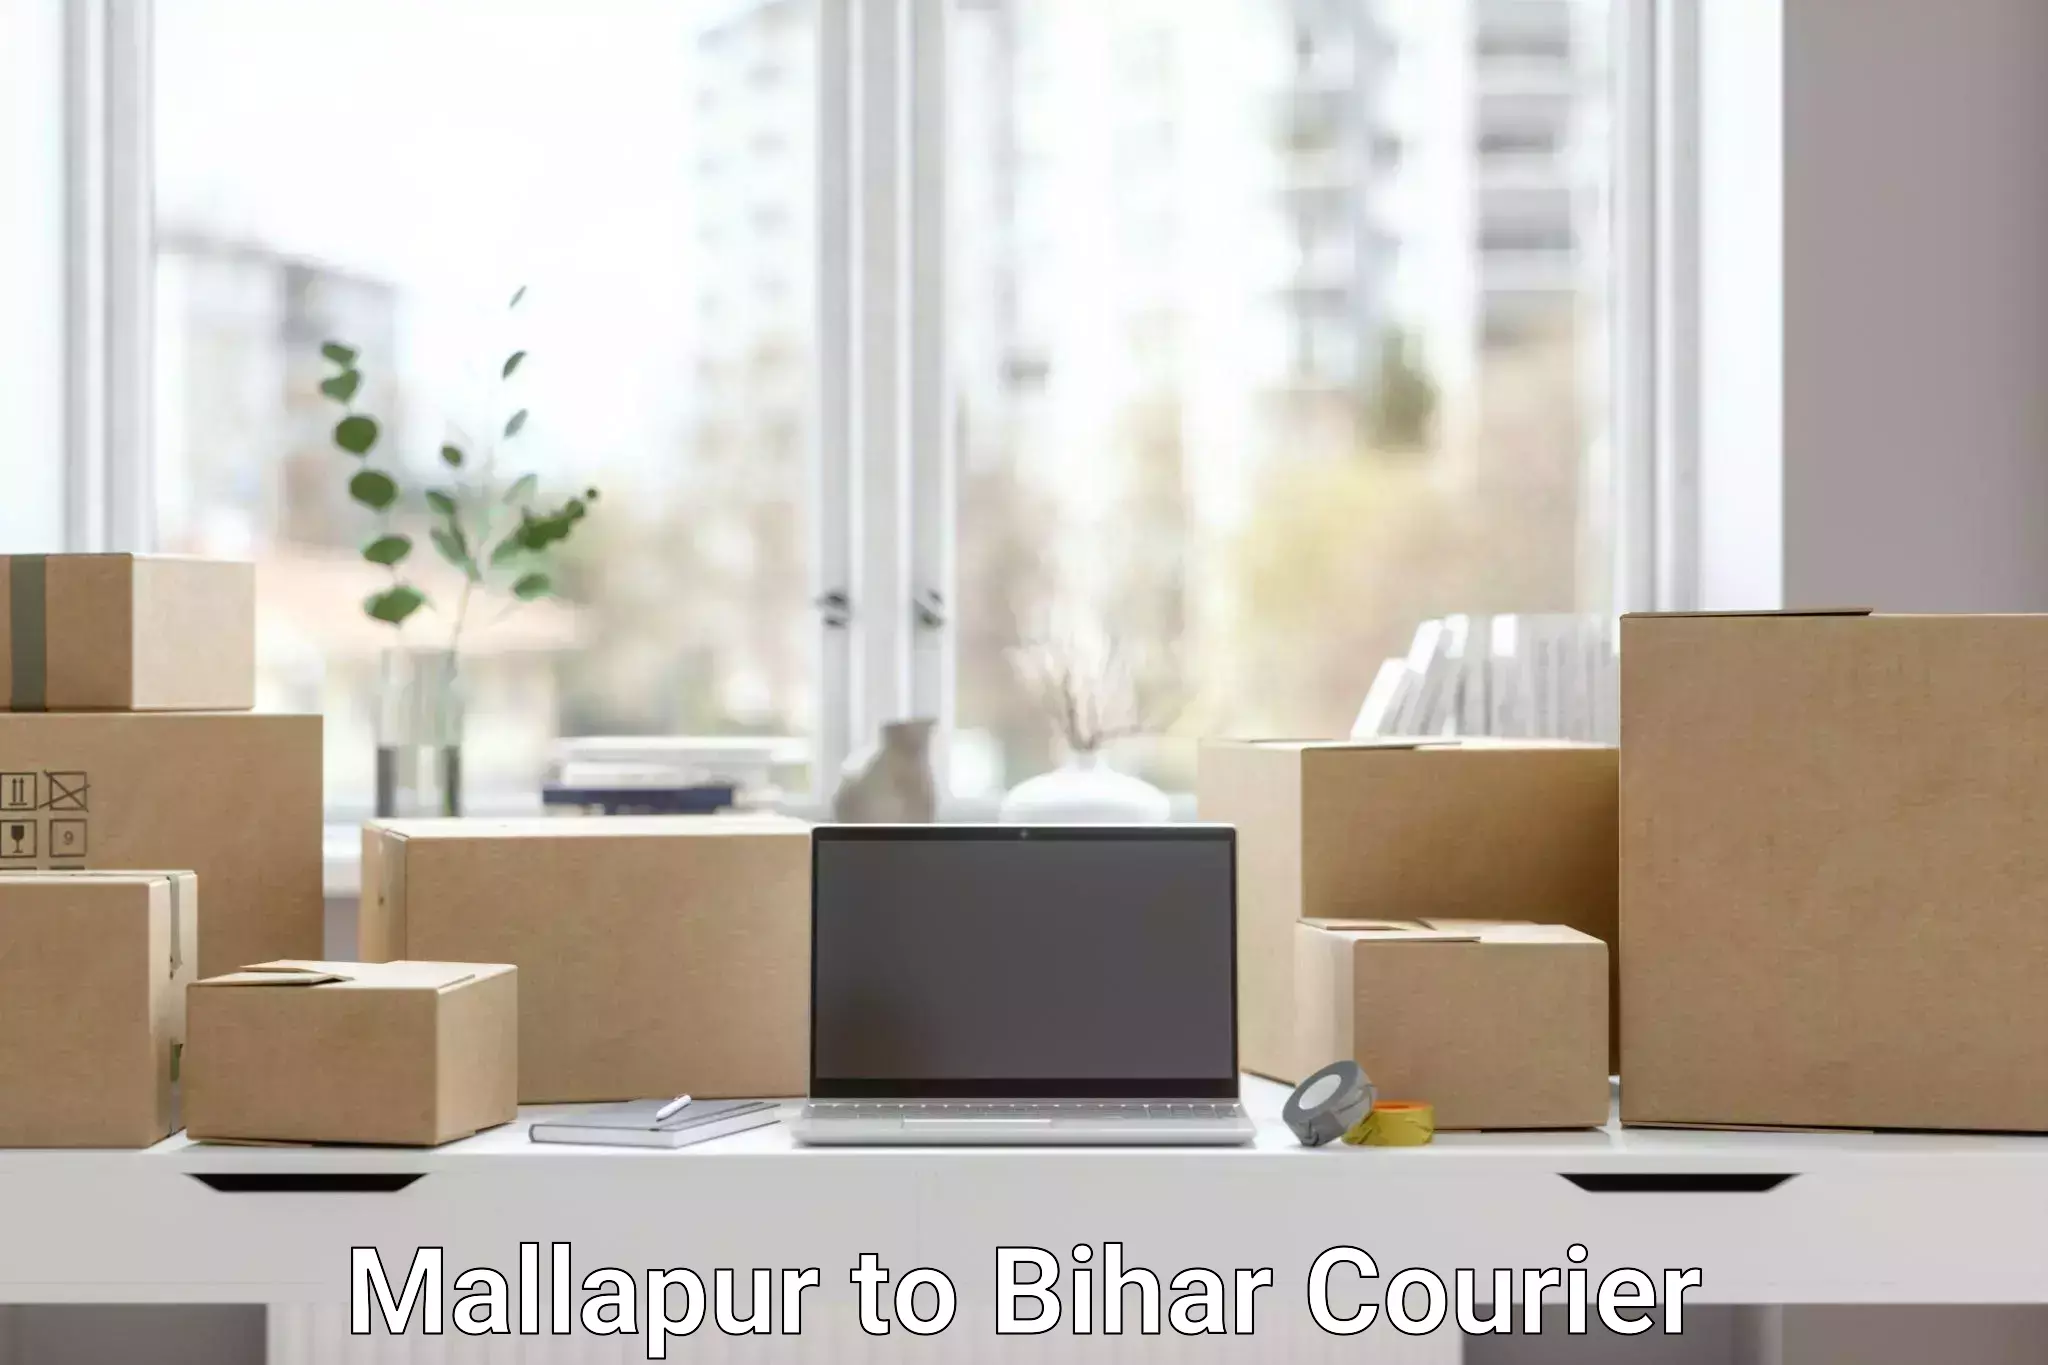 Global courier networks Mallapur to Manihari